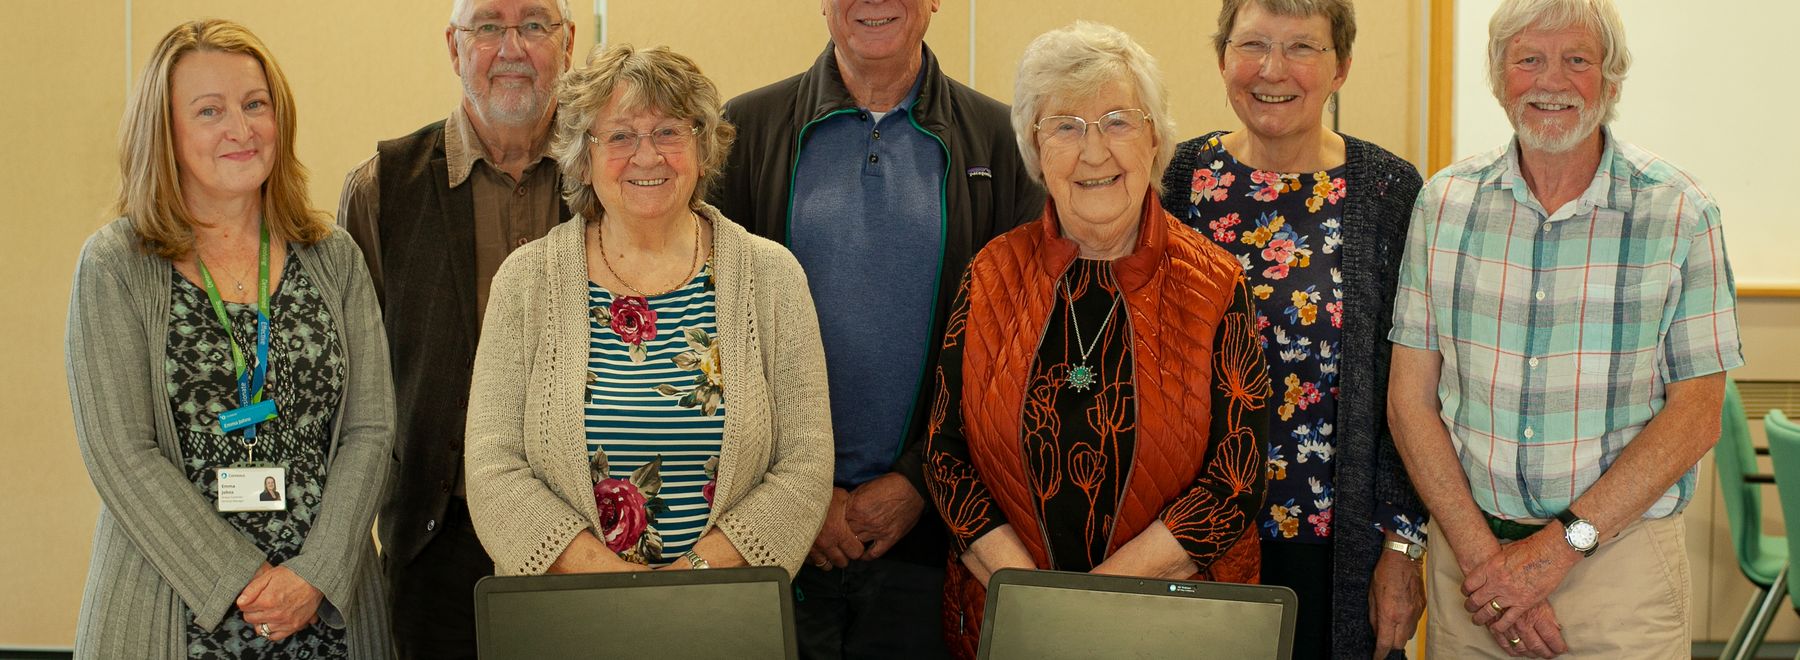 The GOAL group and Emma Johns from Connexus standing in front of two donated laptop computers 